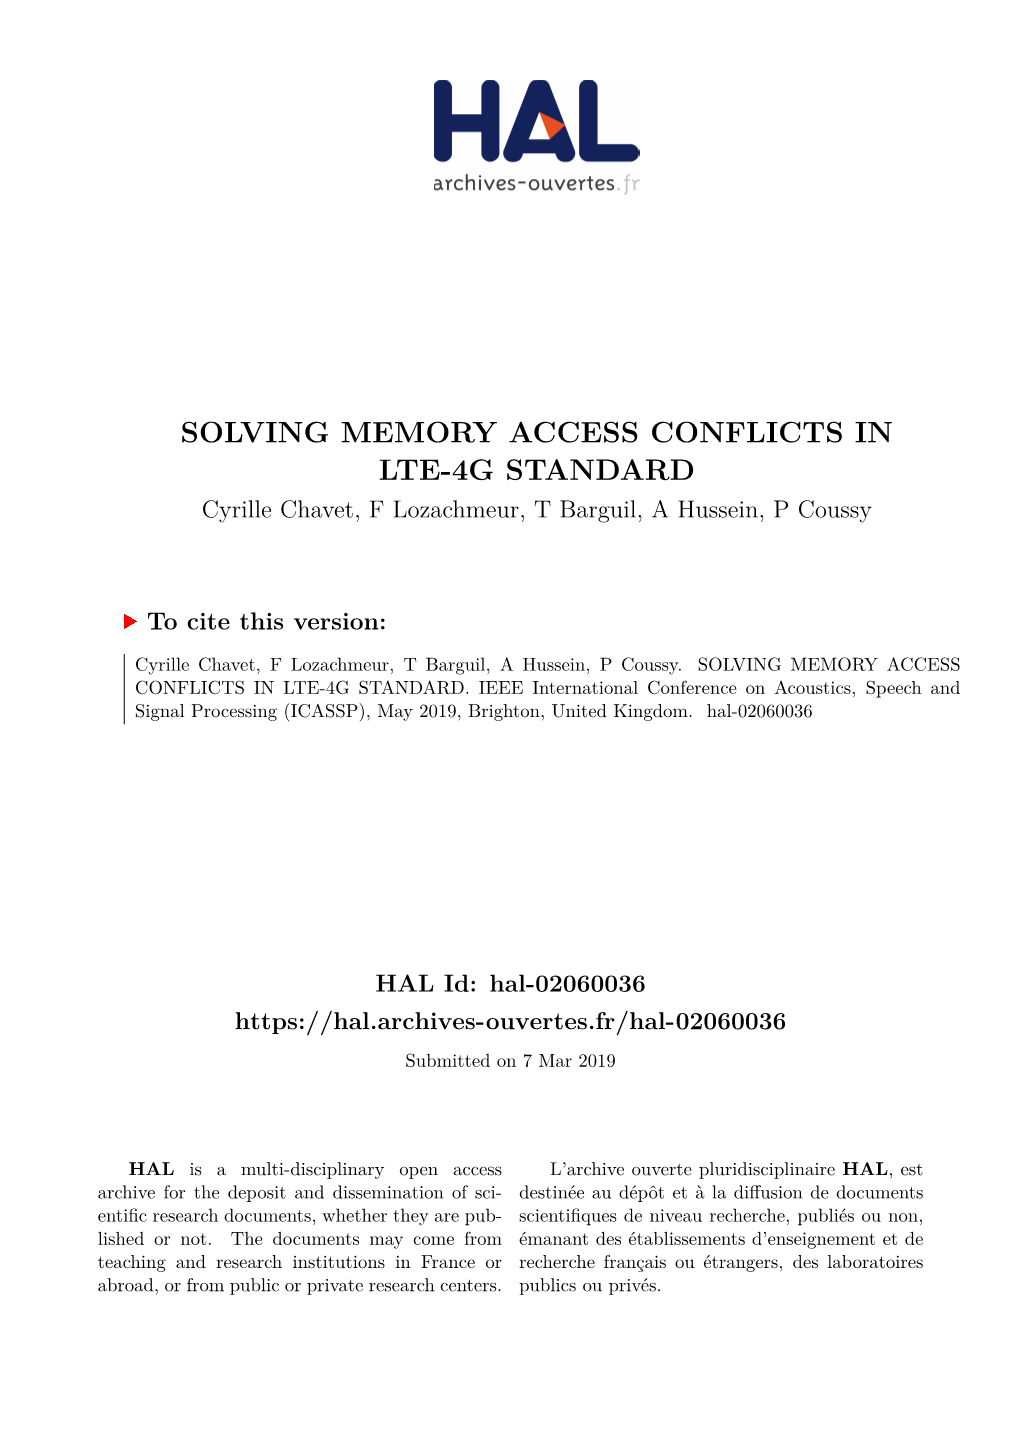 SOLVING MEMORY ACCESS CONFLICTS in LTE-4G STANDARD Cyrille Chavet, F Lozachmeur, T Barguil, a Hussein, P Coussy